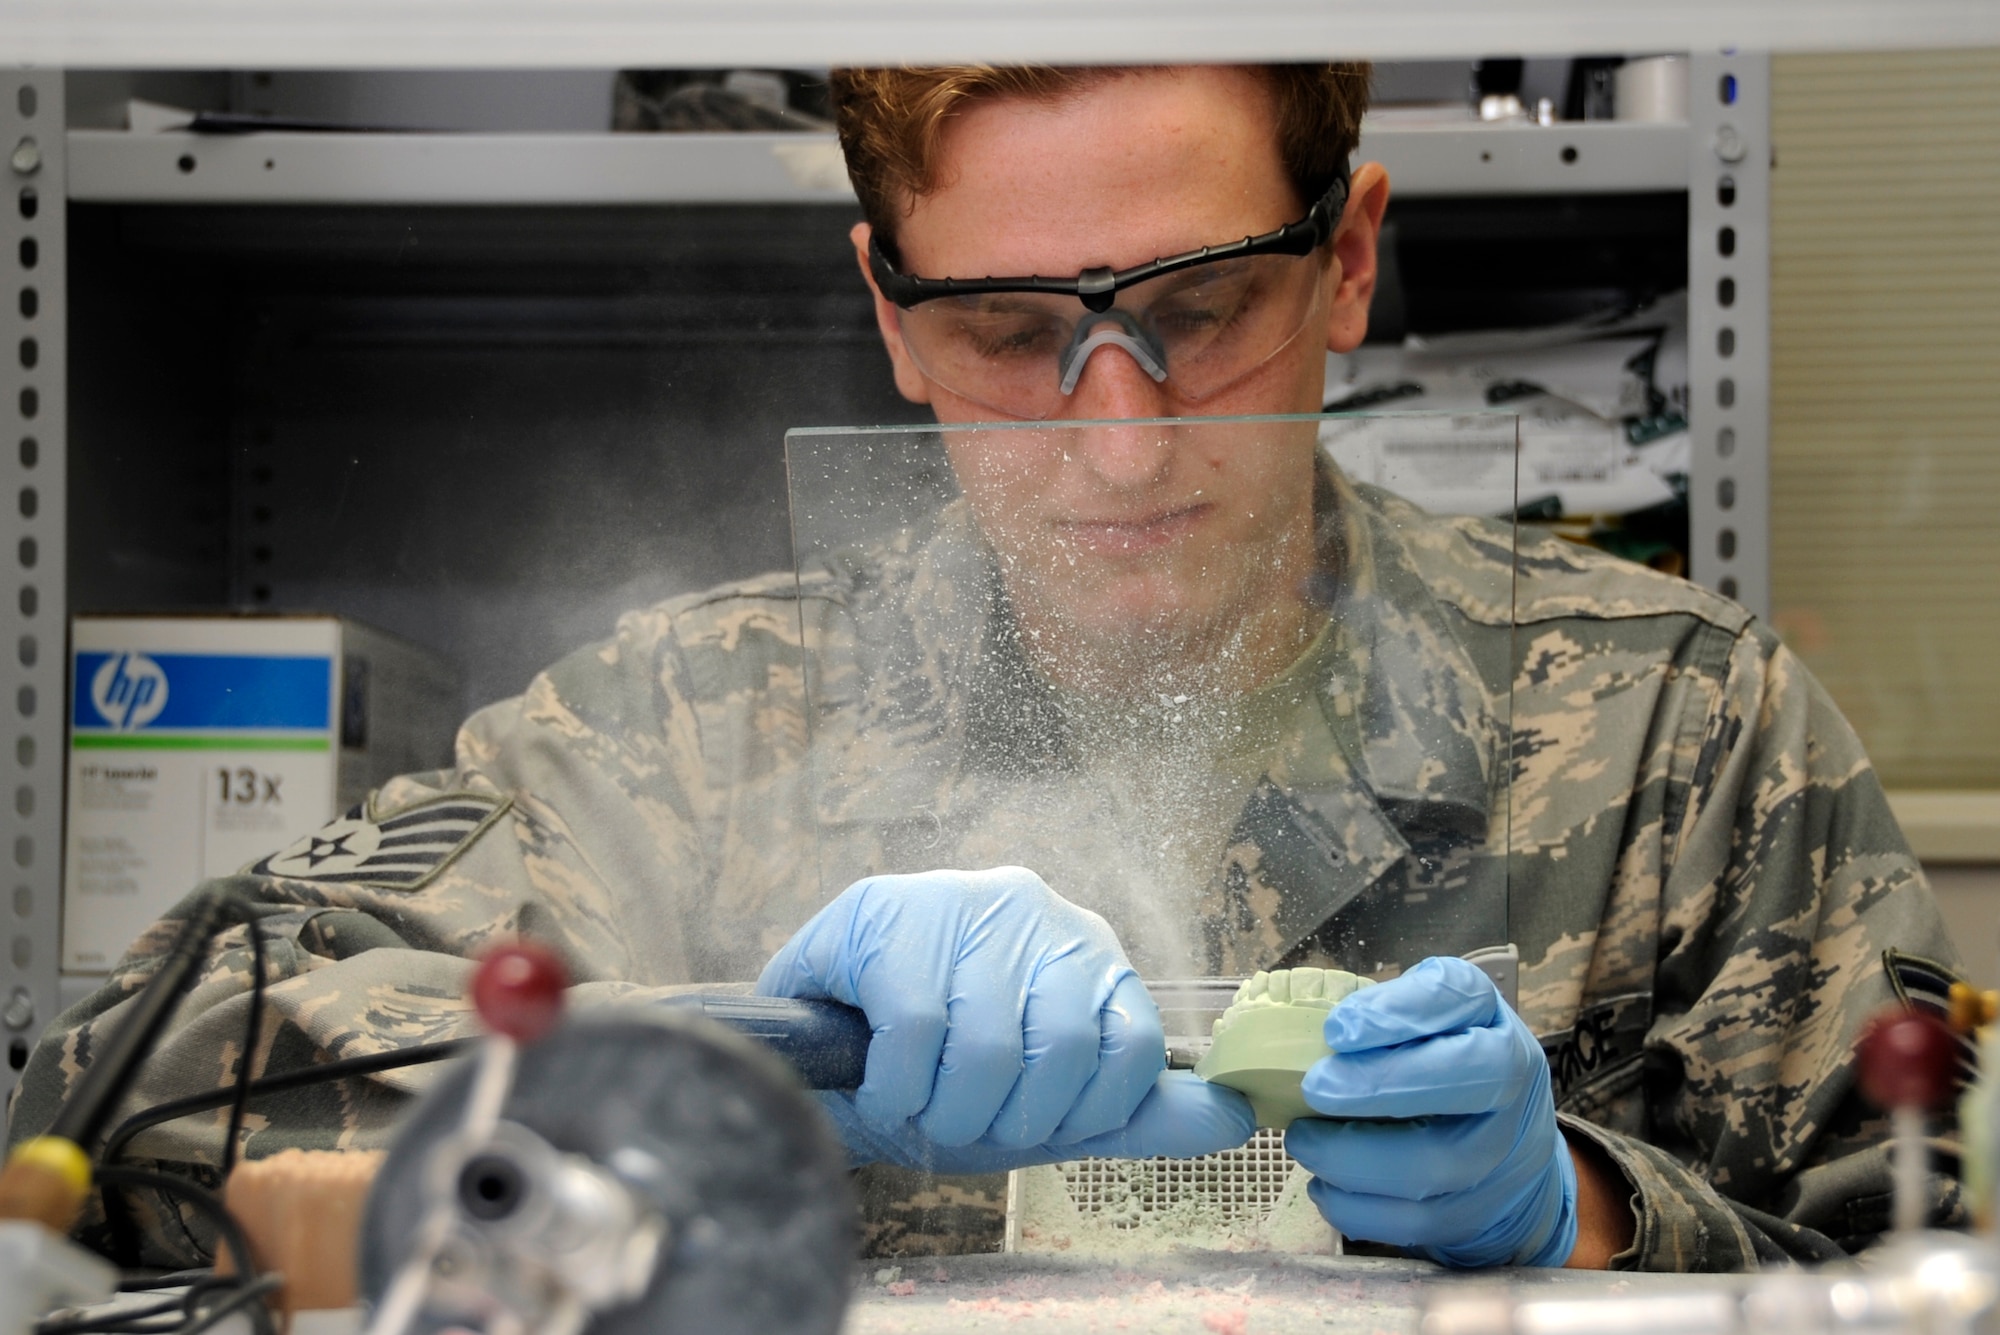 U.S. Air Force Staff Sgt. Cameron Dungey, 35th Dental Squadron dental lab technician, grinds a dental stone impression of a patient's teeth at Misawa Air Base, Japan, June 27, 2013. The dental lab receives approximately 20 impressions each day. Each impression is cast into a mold to use as an accurate base when making crowns and night-guards. (U.S. Air Force photo by Airman 1st Class Kaleb Snay)